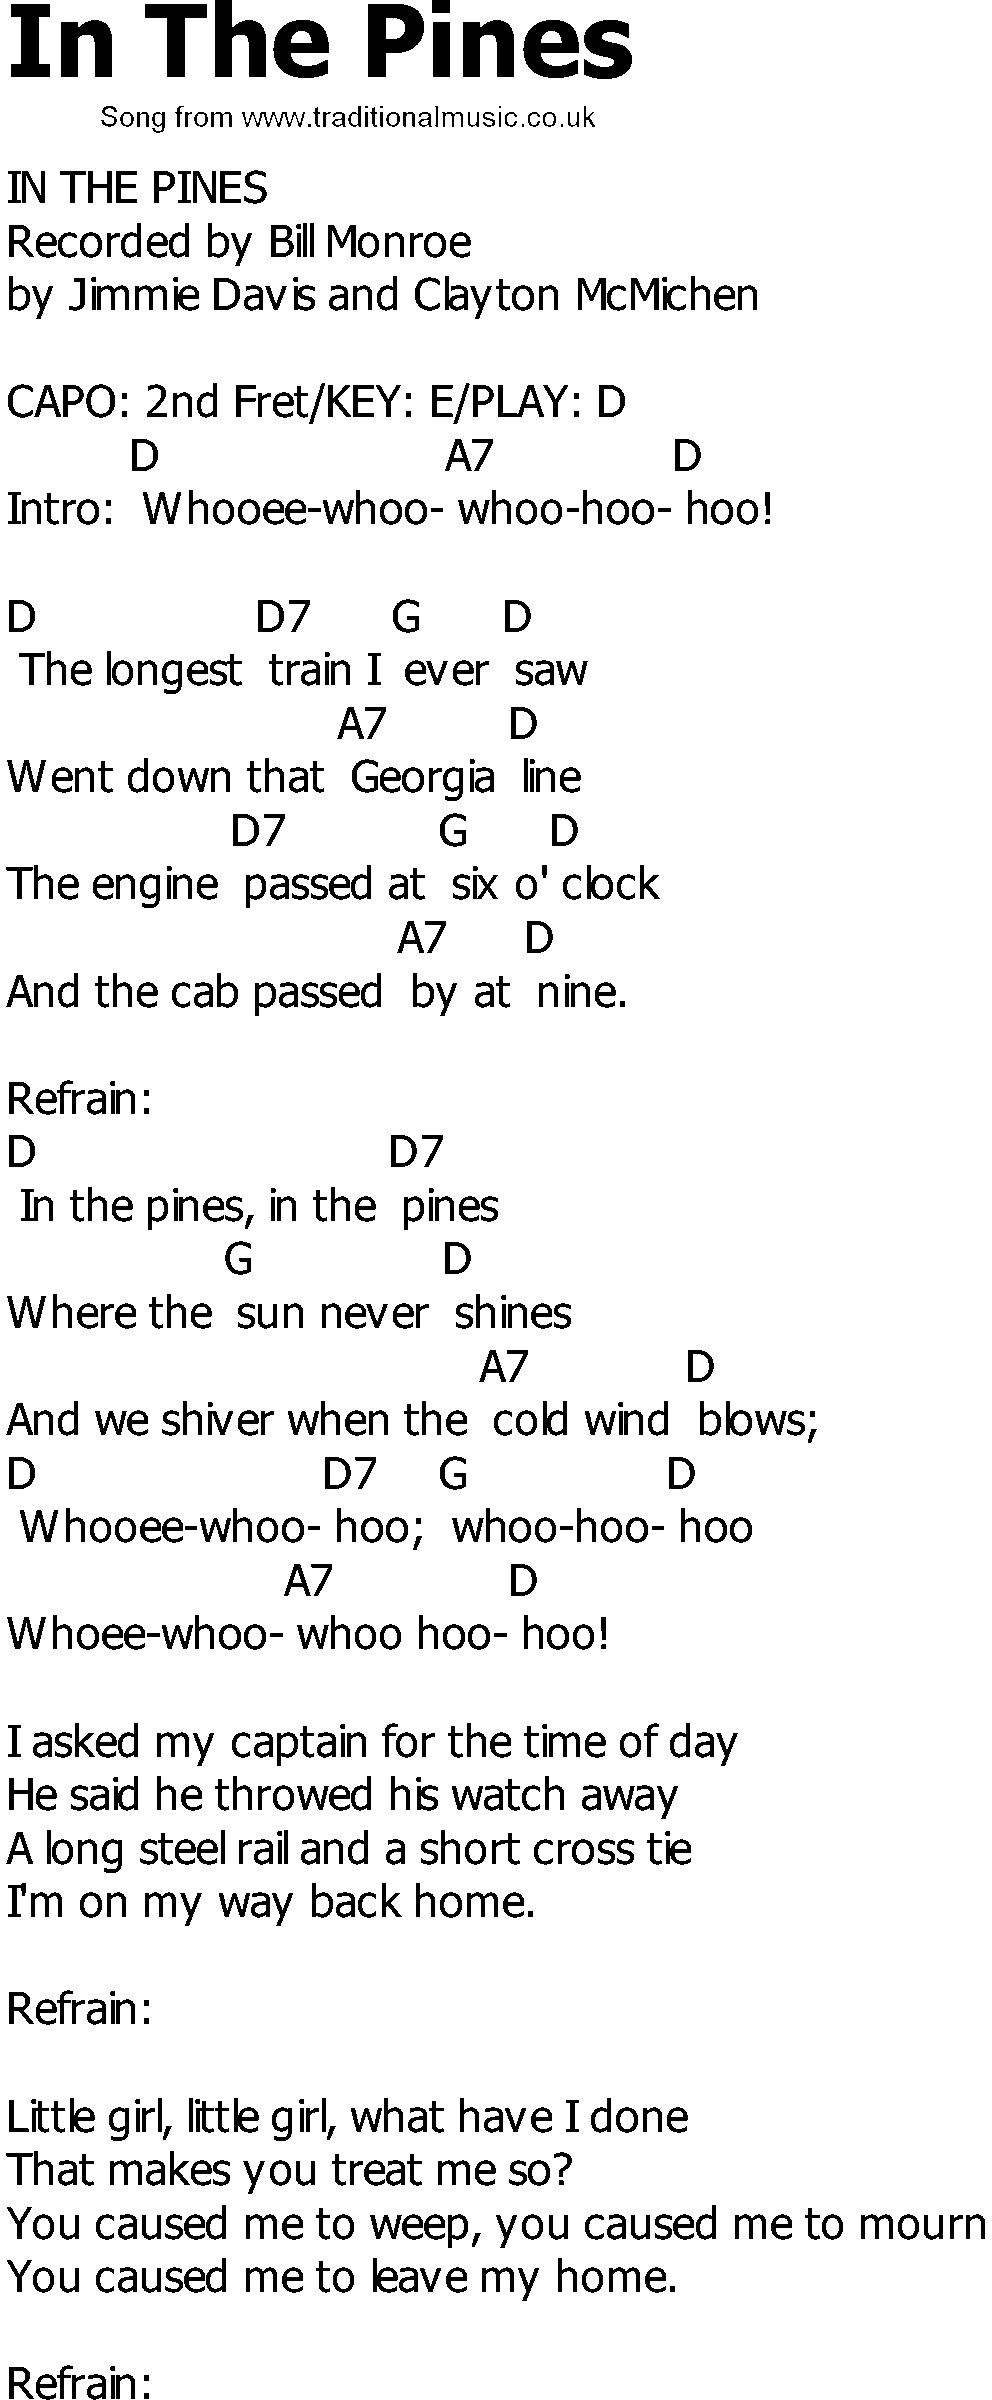 Old Country song lyrics with chords - In The Pines